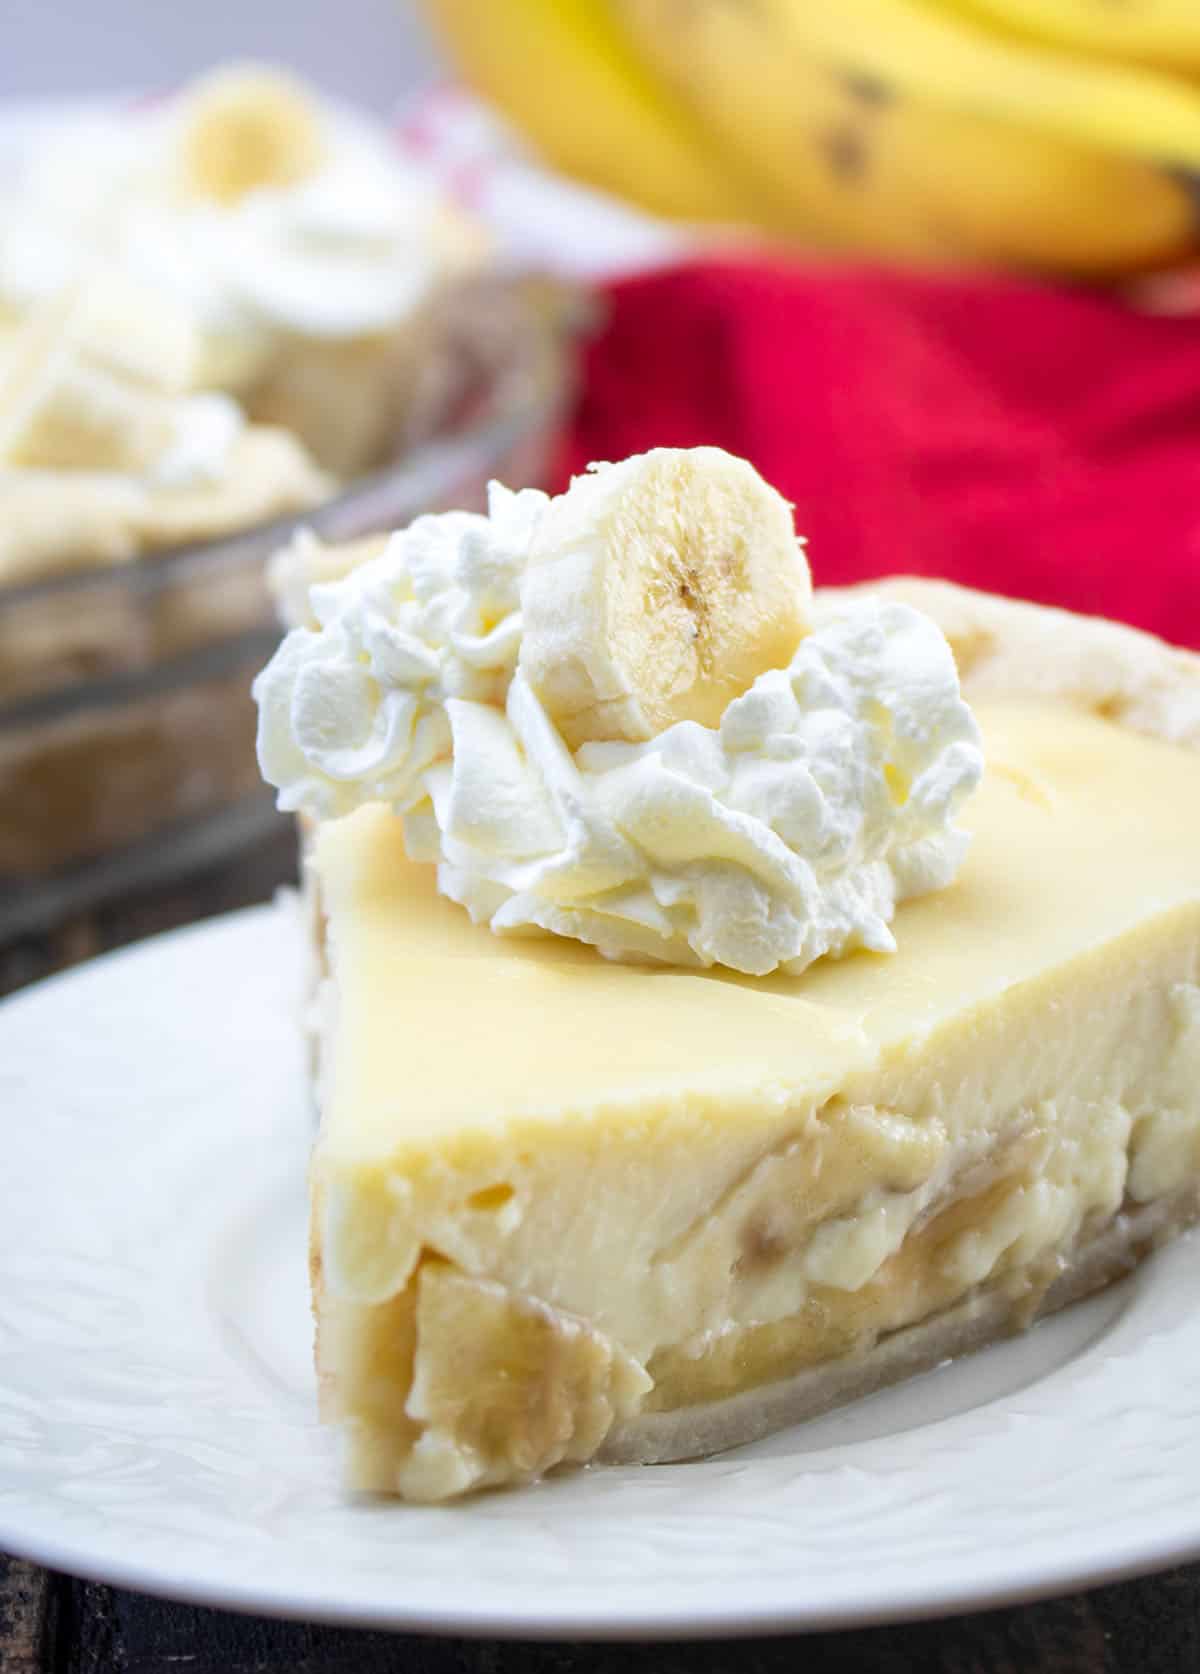 slice of pie with whipped cream and banana slice on top